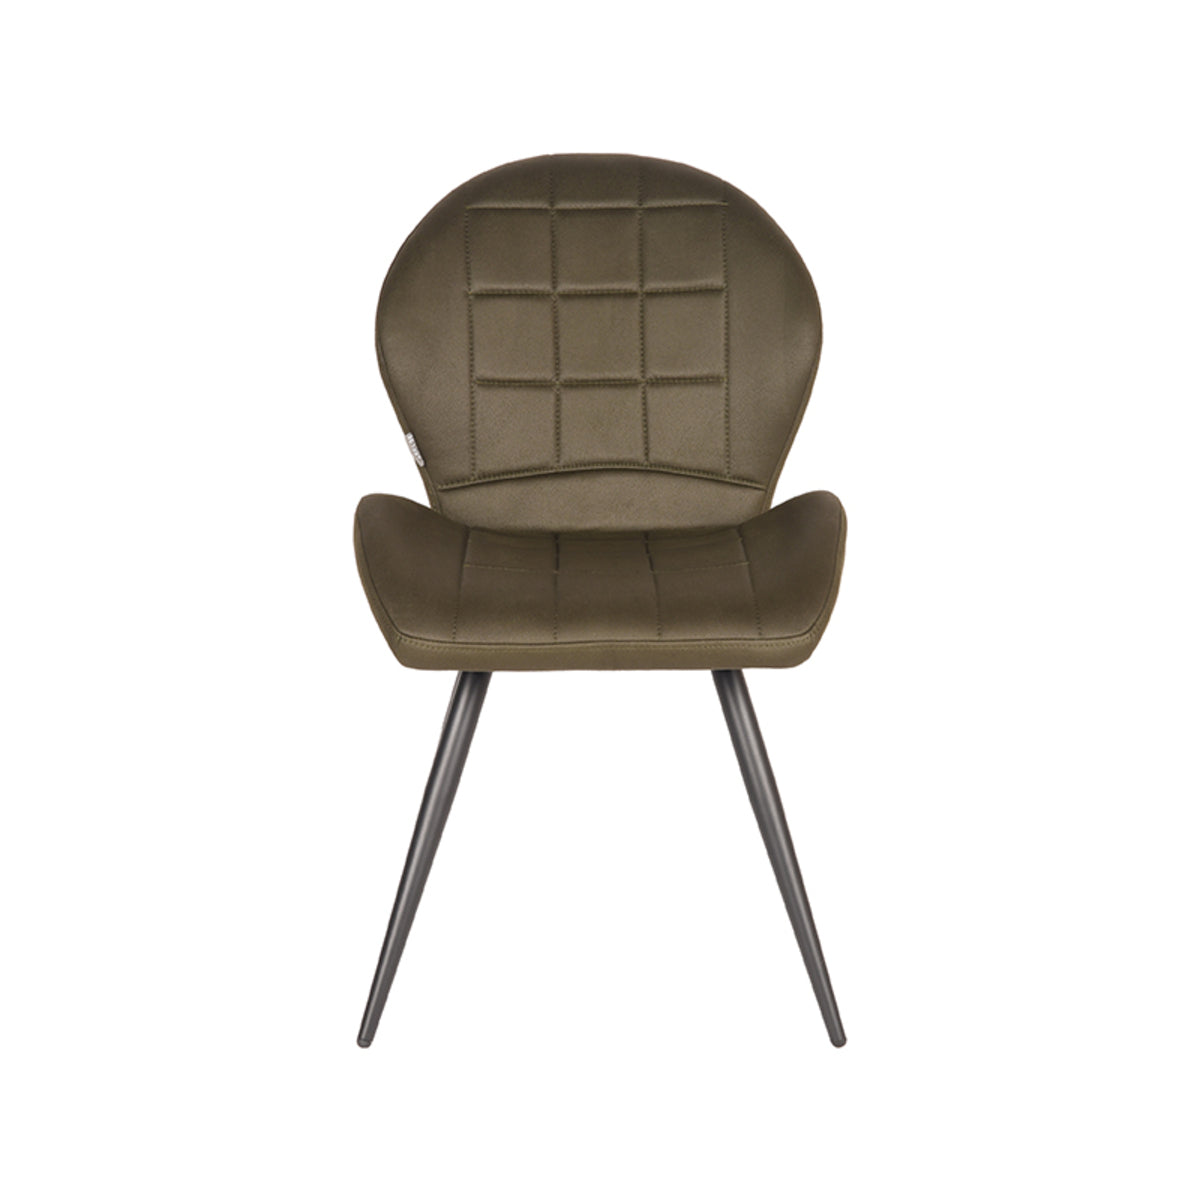 LABEL51 Dining room chair Sil - Army green - Microfiber | 2 pieces